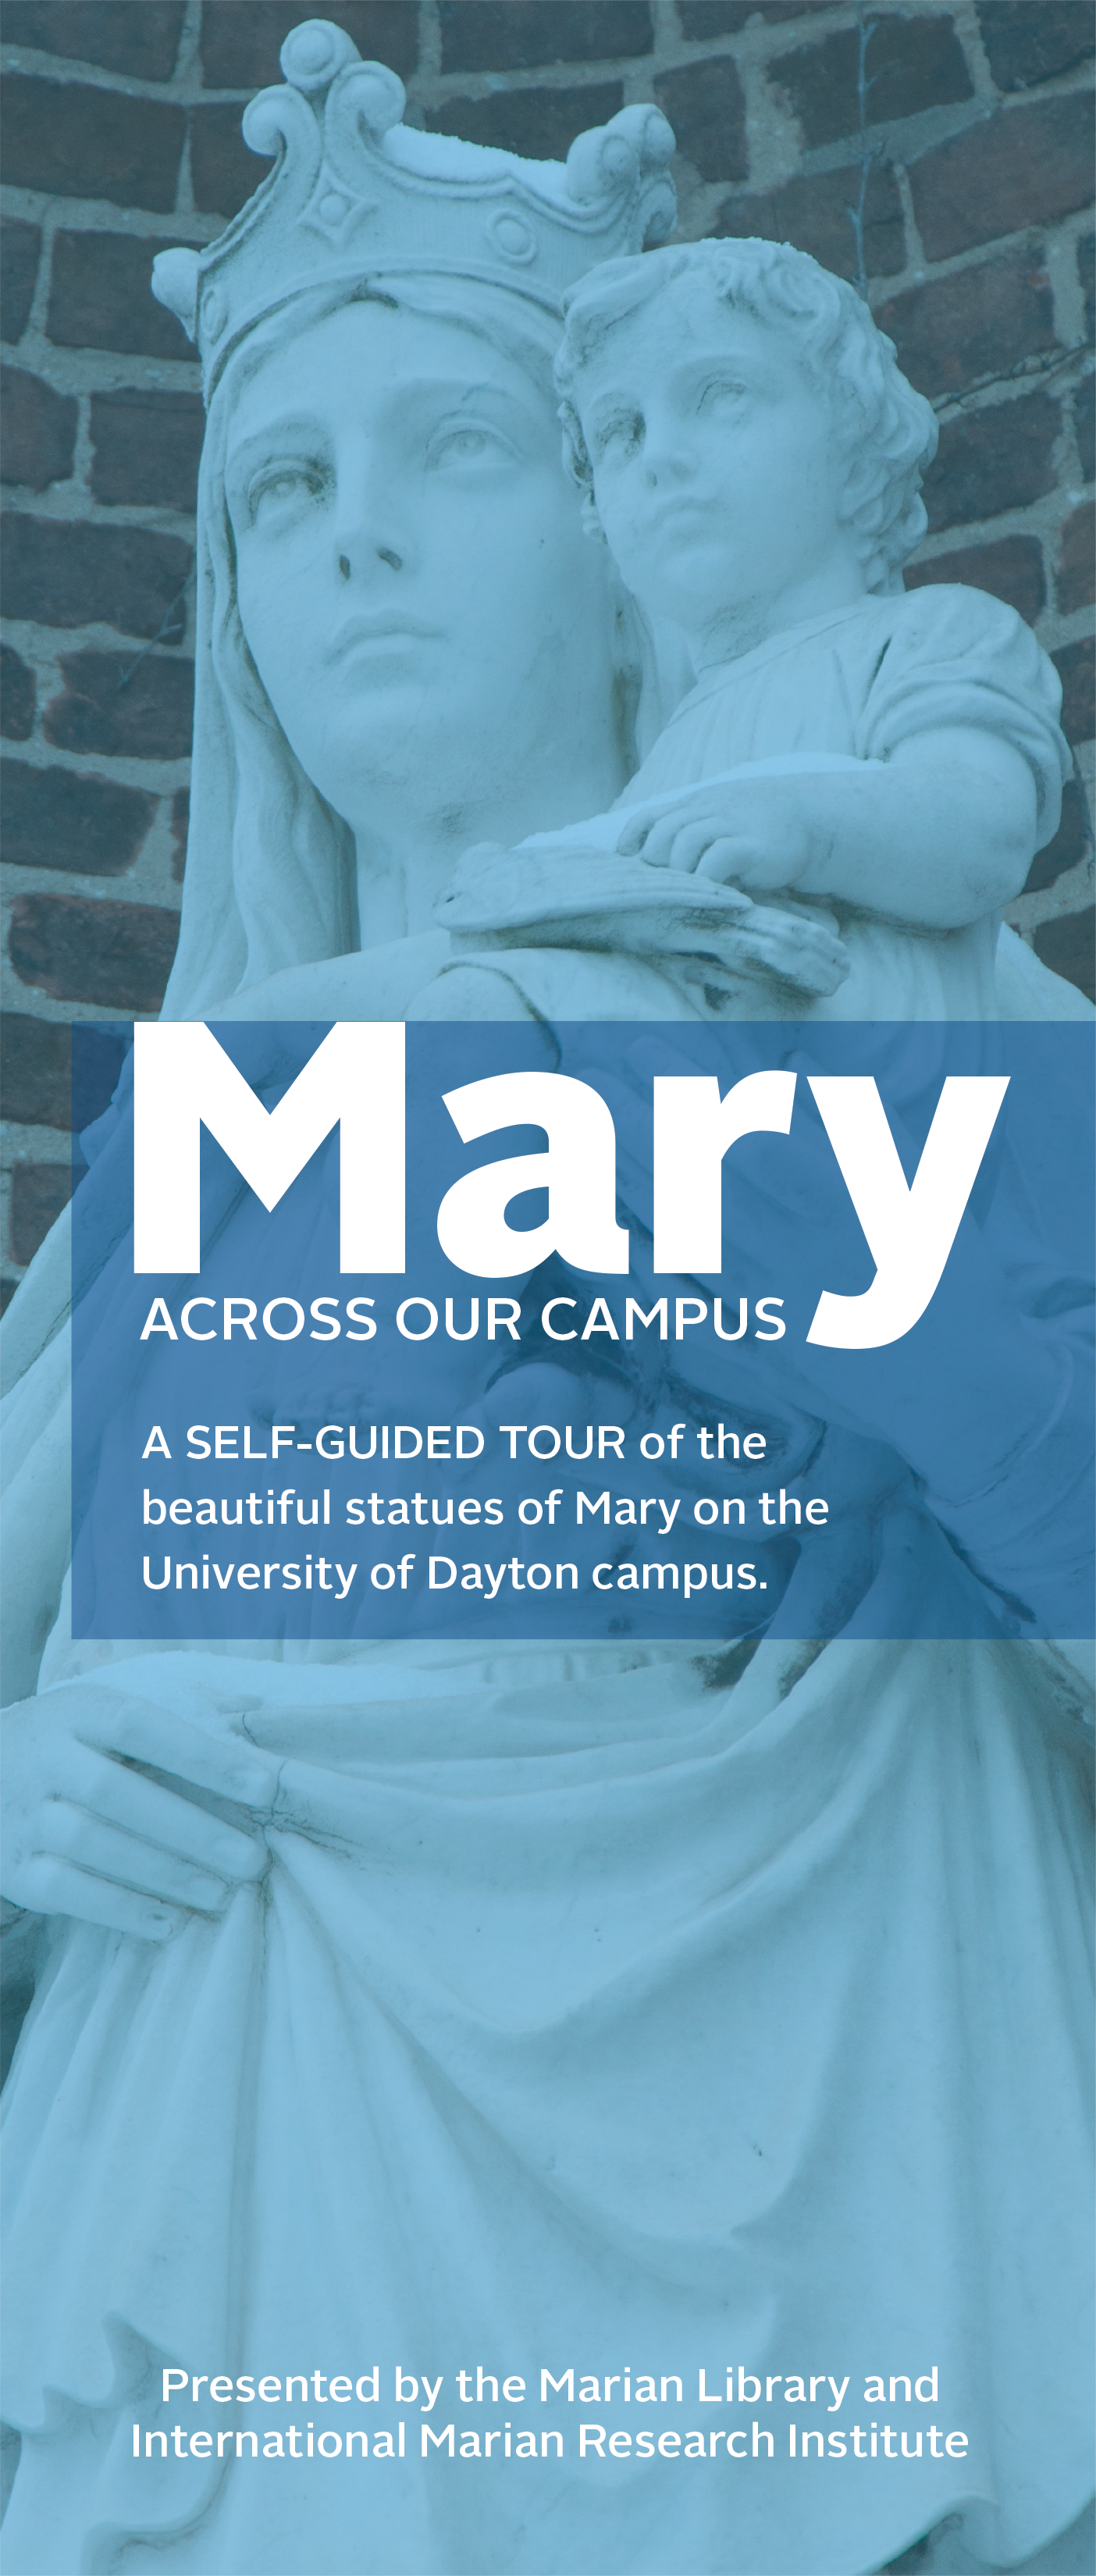 Look for this self-guided tour brochure in the Roesch Library lobby, the Marian Library reception area and in the Chapel of the Immaculate Conception.